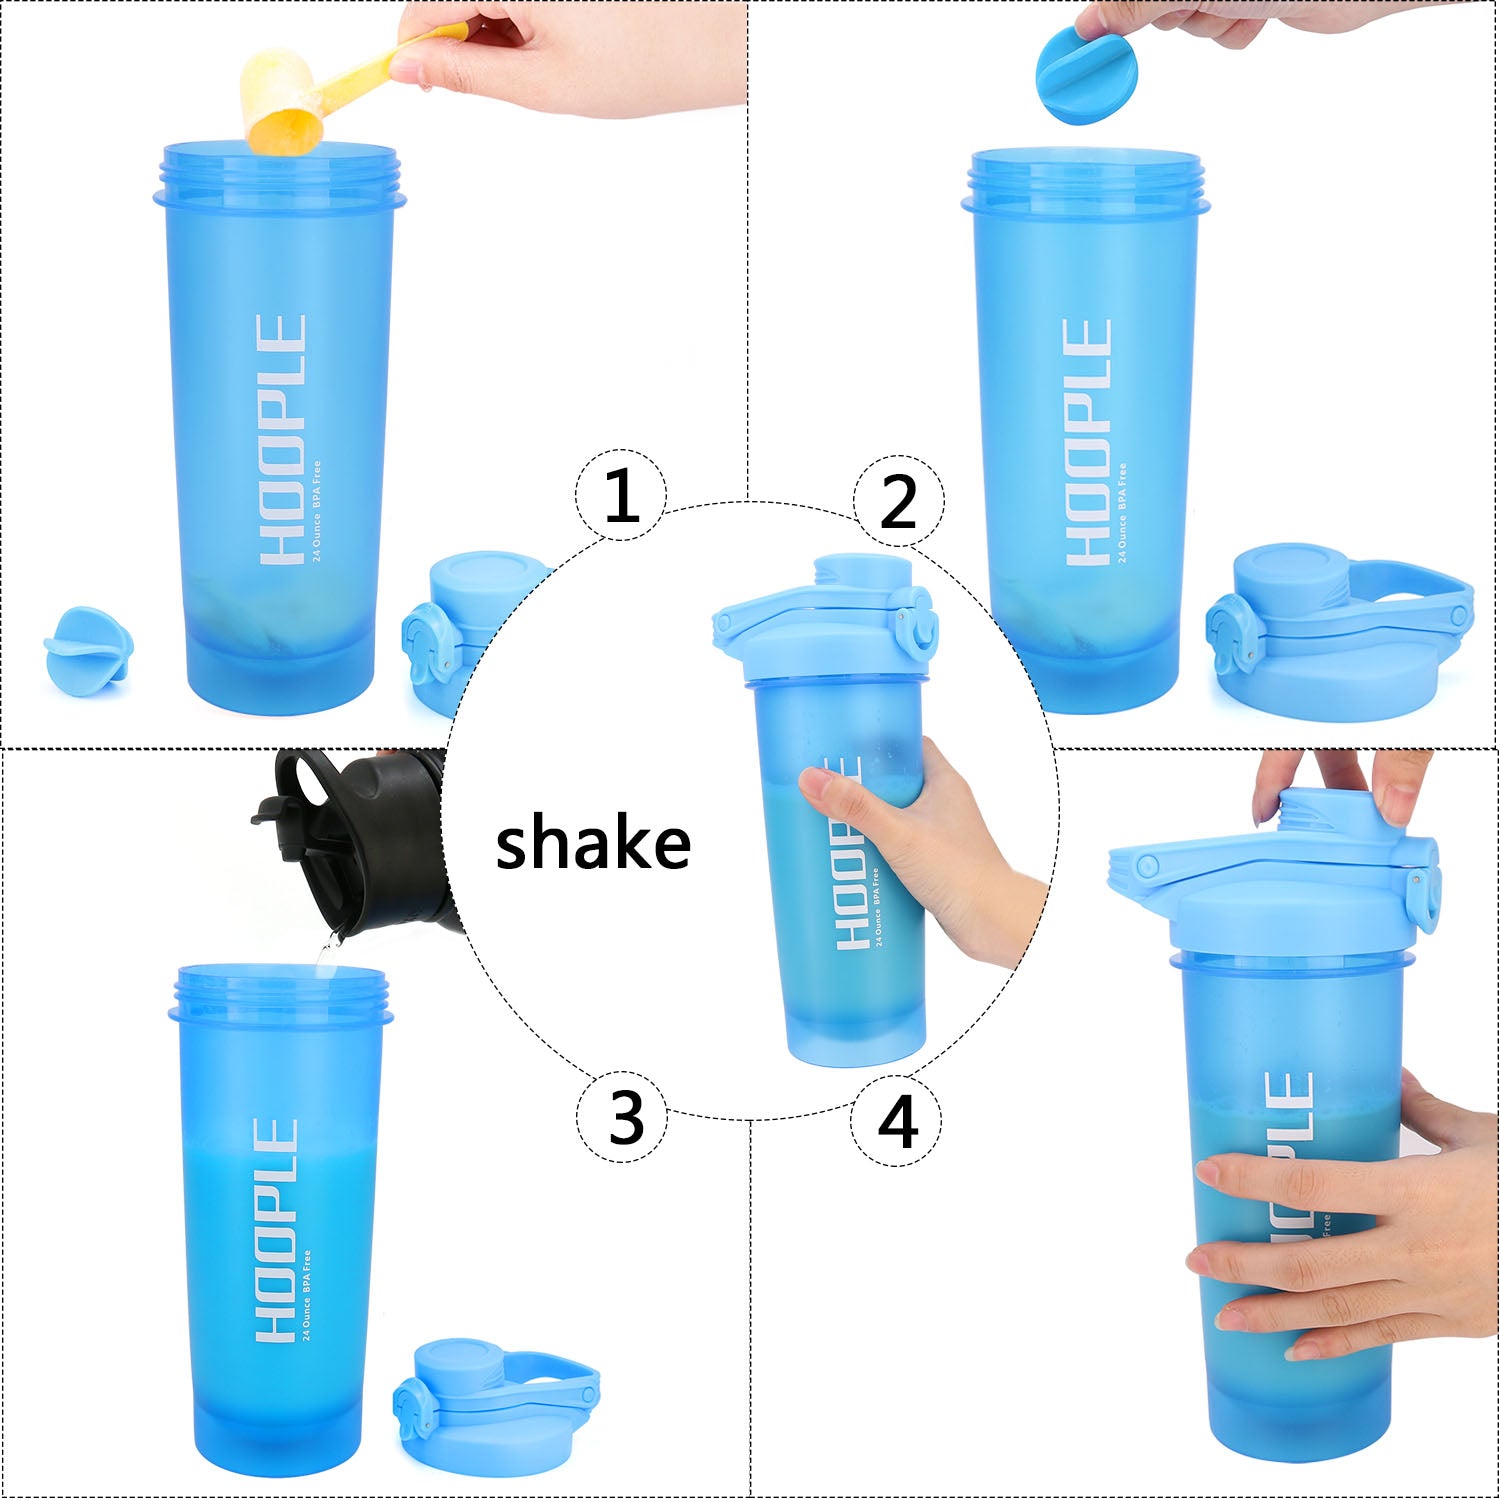 Hoople 24 OZ Shaker Bottle Protein Powder Shake Blender Gym Smoothie Cup, BPA Free, Auto-Flip Leak-Proof Lid, Handle with Ball Included - Aqua